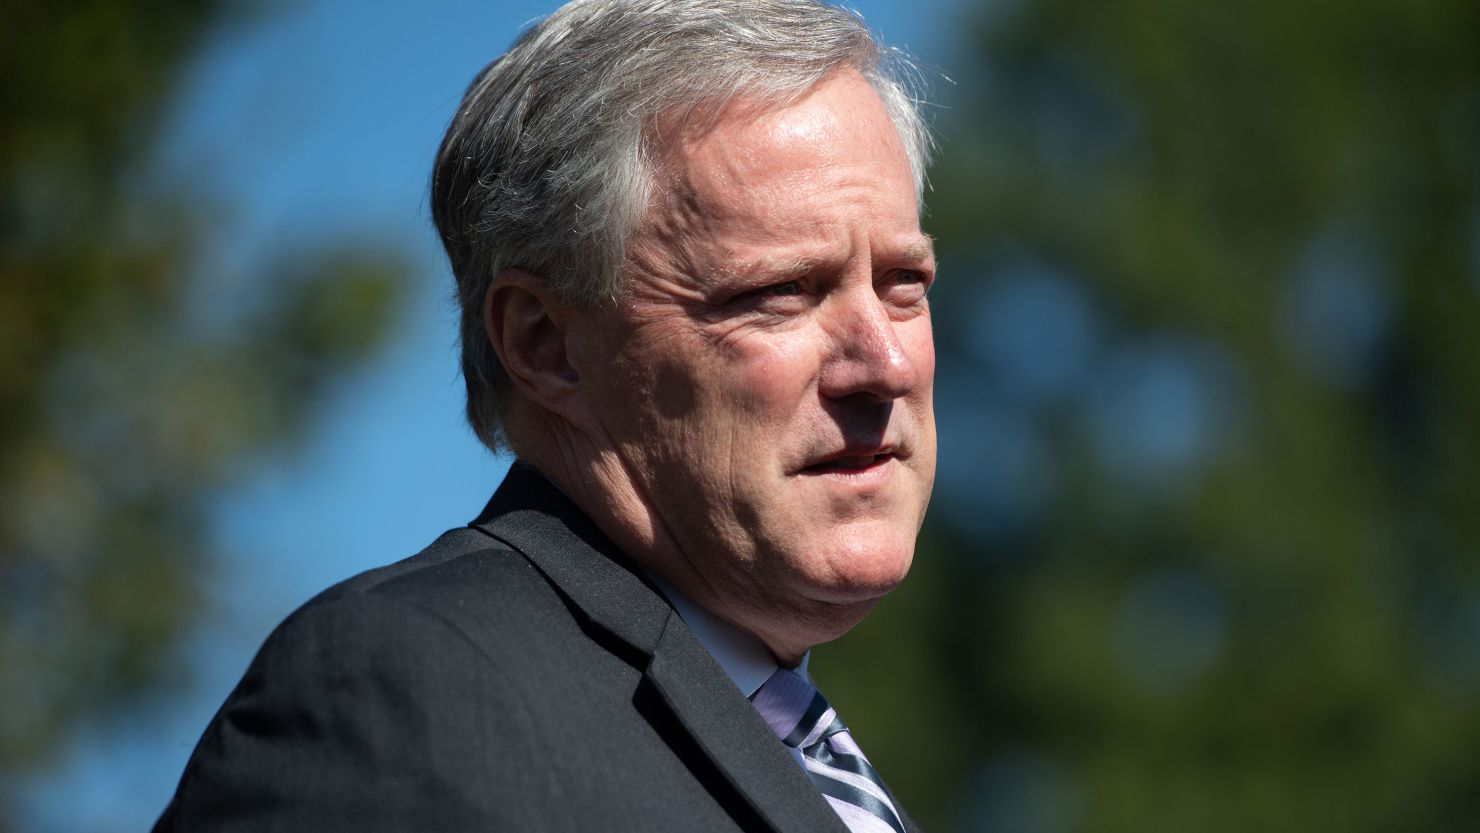 Then-White House Chief of Staff Mark Meadows speaks to the media about President Donald Trump at the White House on October 2, 2020.